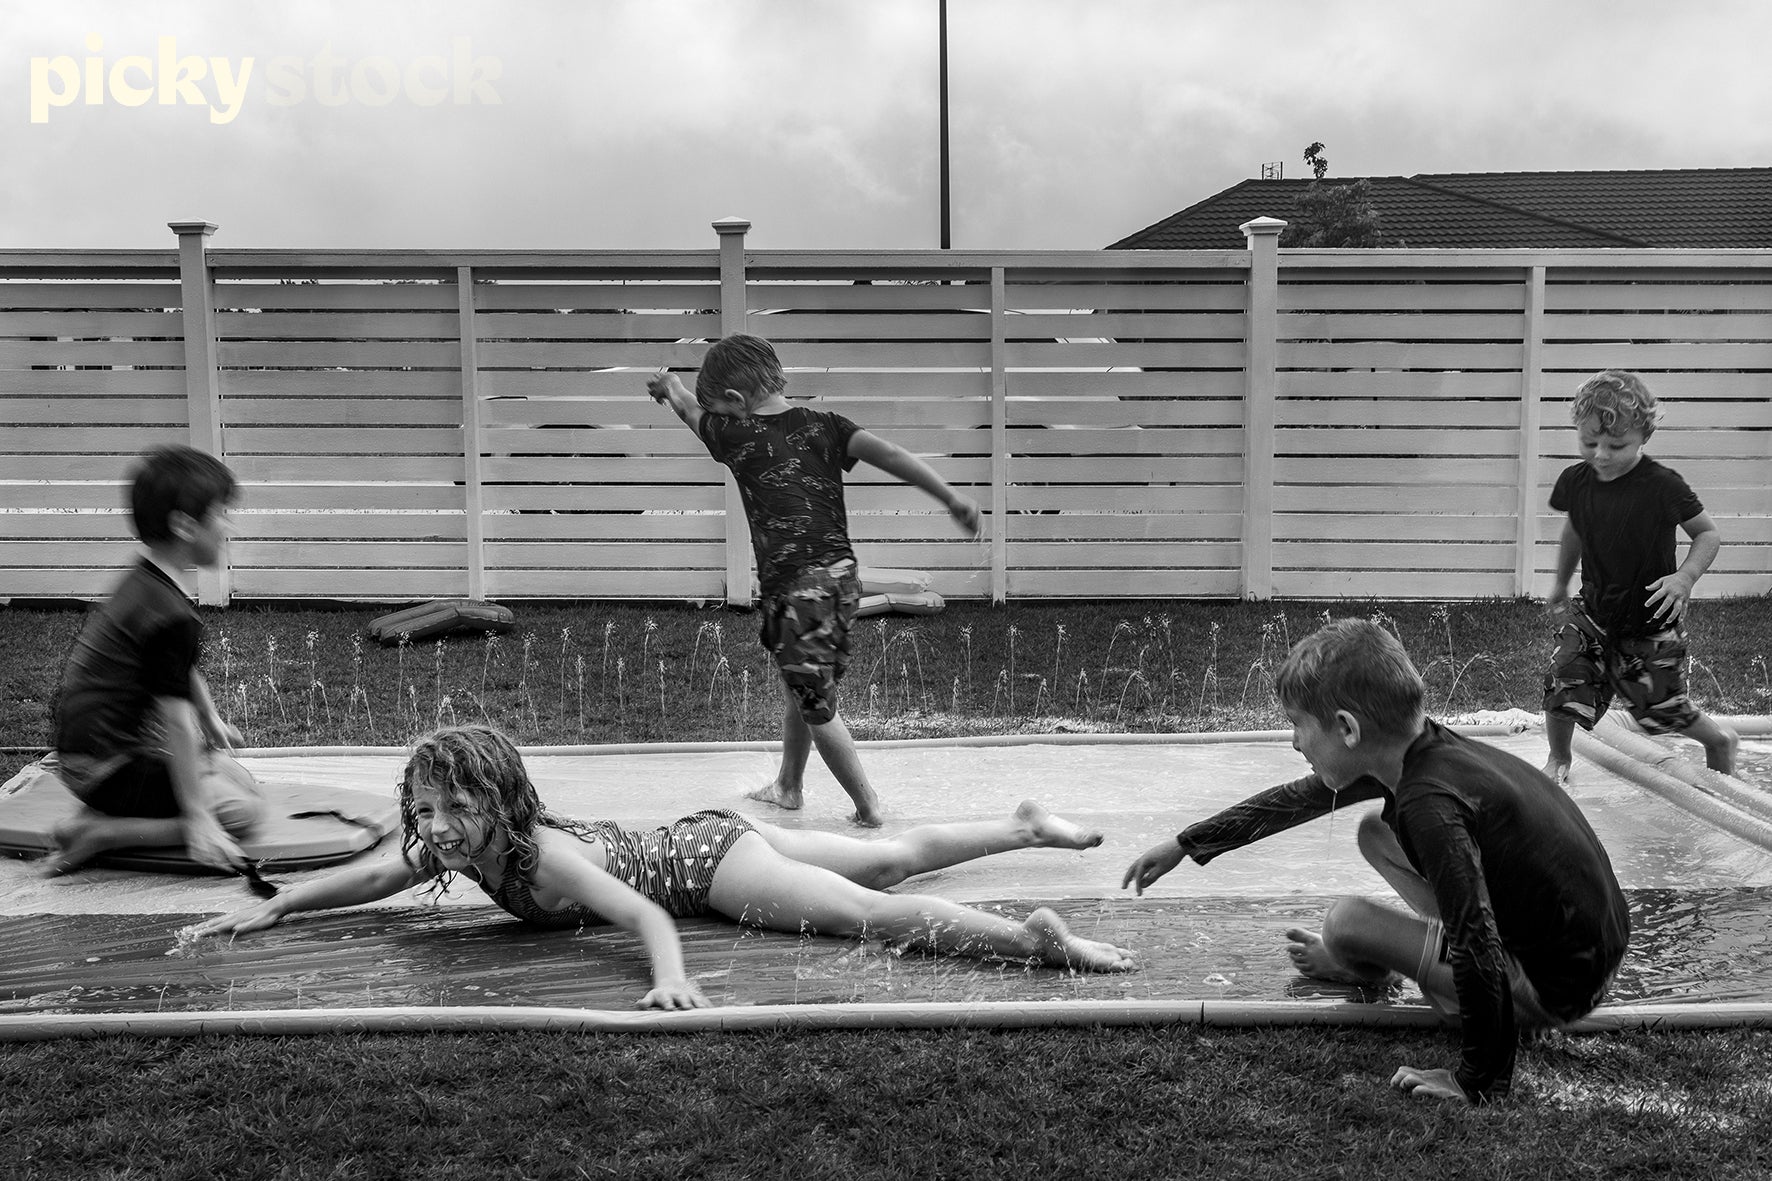 Five kids playing on a slip and slide in their backyard. Kids are young all wearing their togs and swimwear in barefeet. Four boys and one young girl. They are all in various positions around the frame. Motion blur left of frame